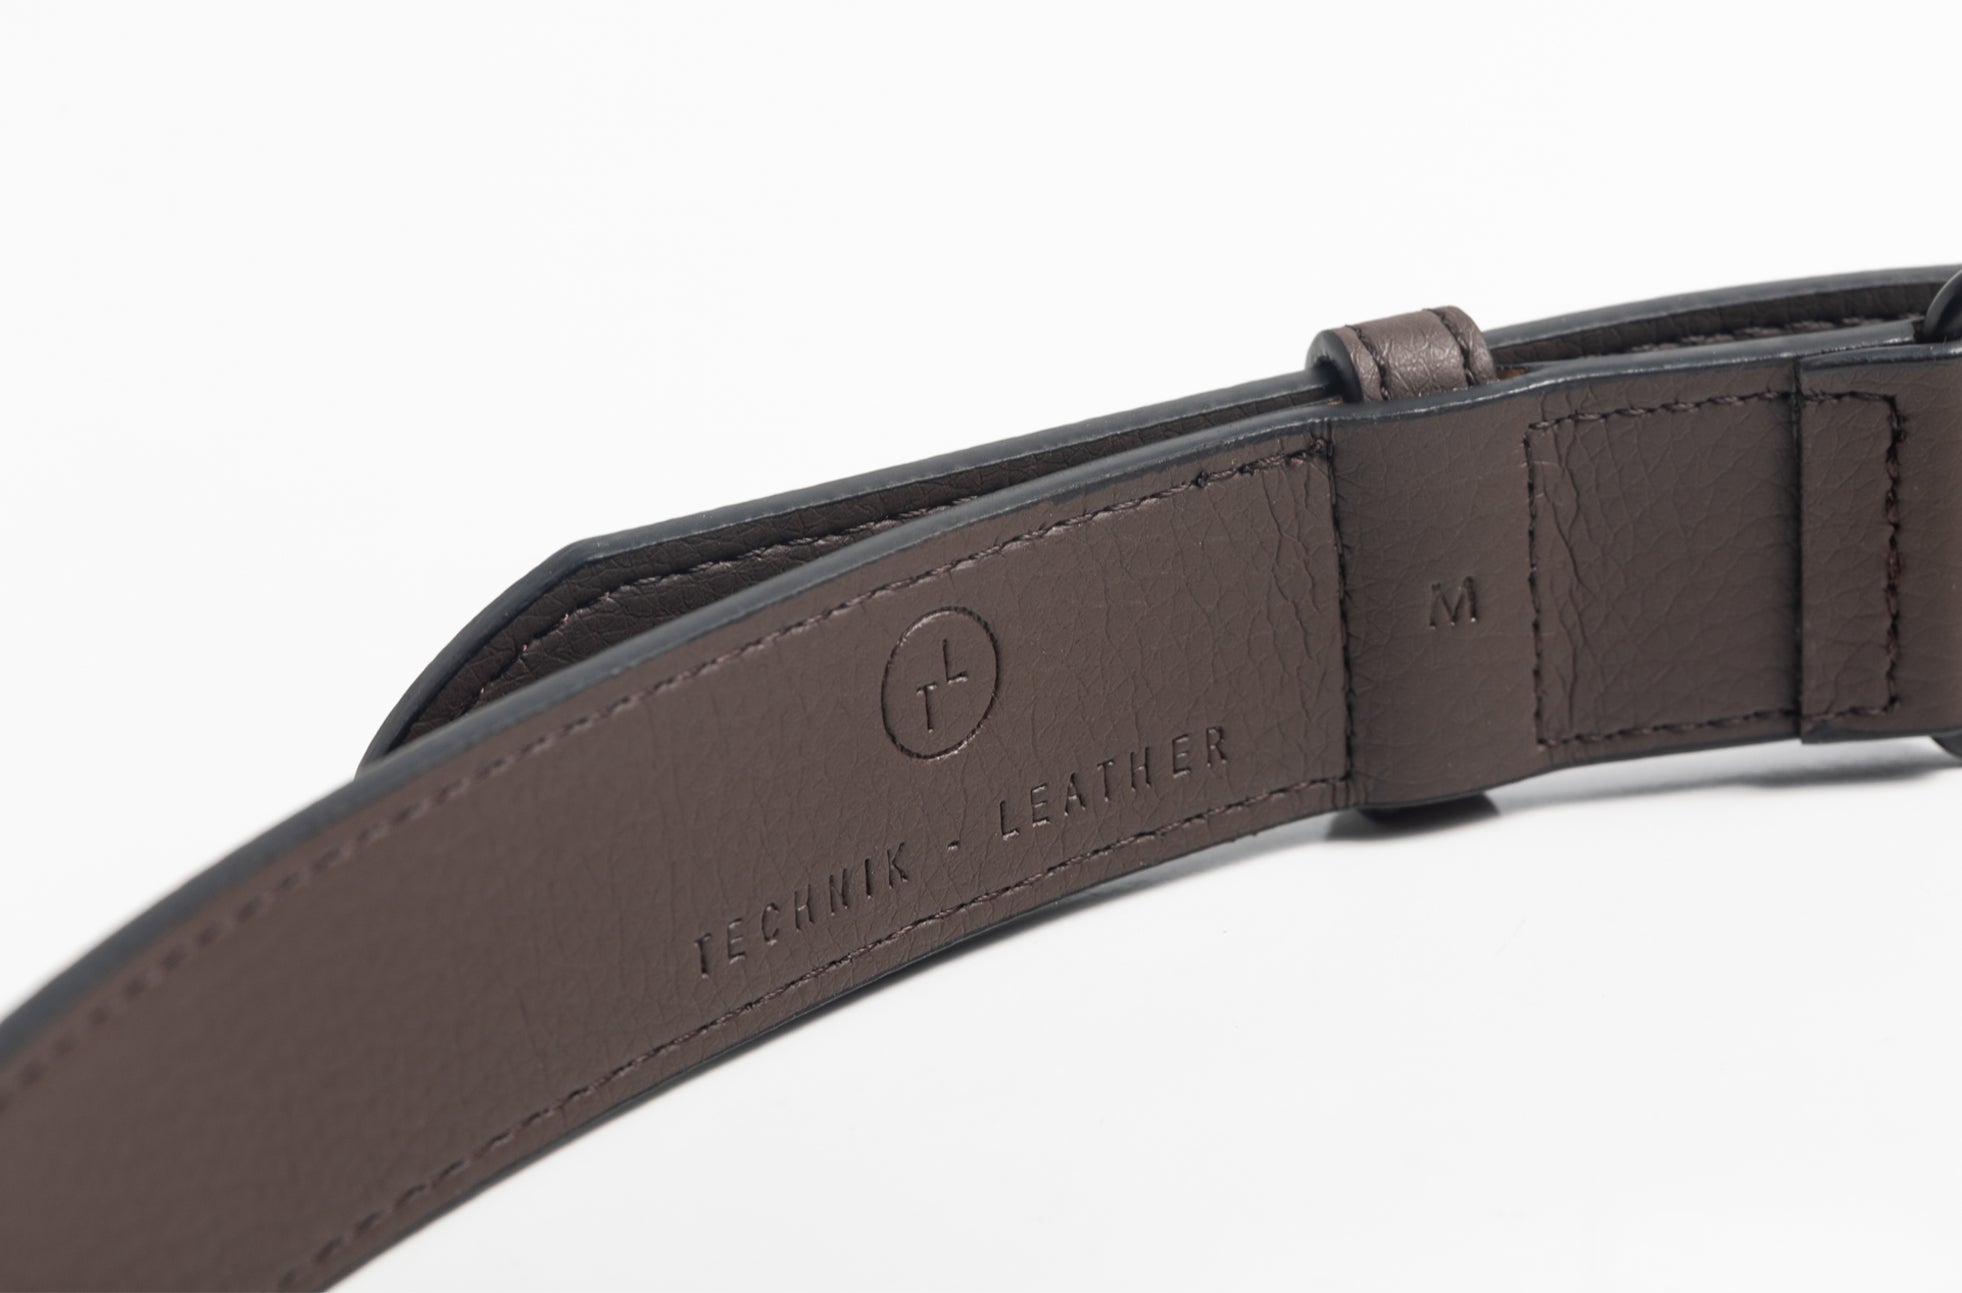 The Women's Belt in Technik-Leather in Taupe image 9